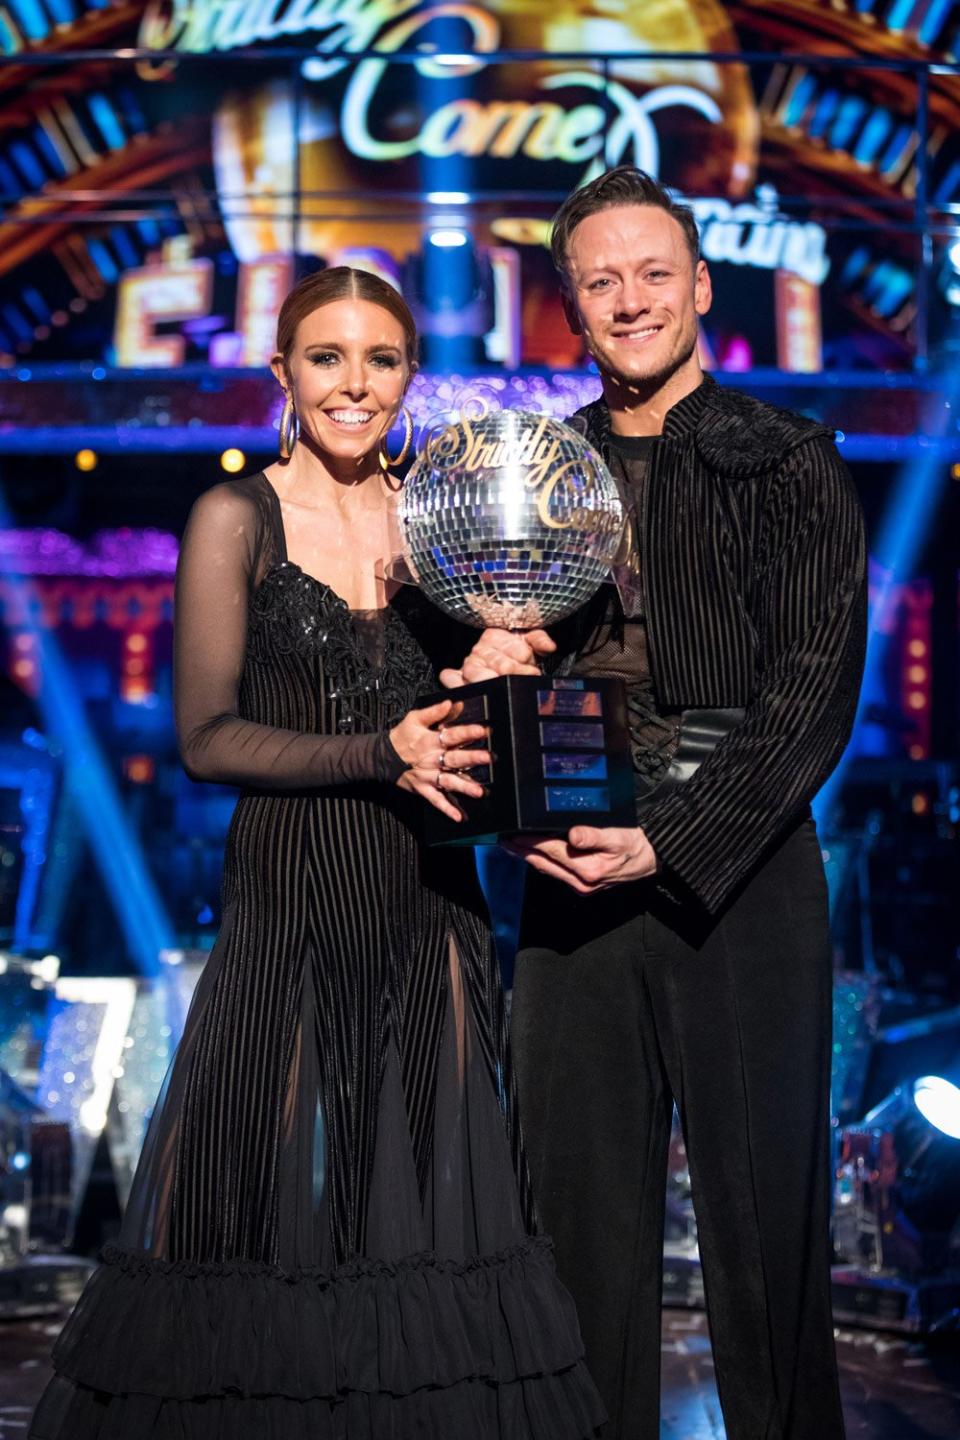 Champions: Stacey Dooley and Kevin Clifton took home the winning prize last year (BBC / Guy Levy)